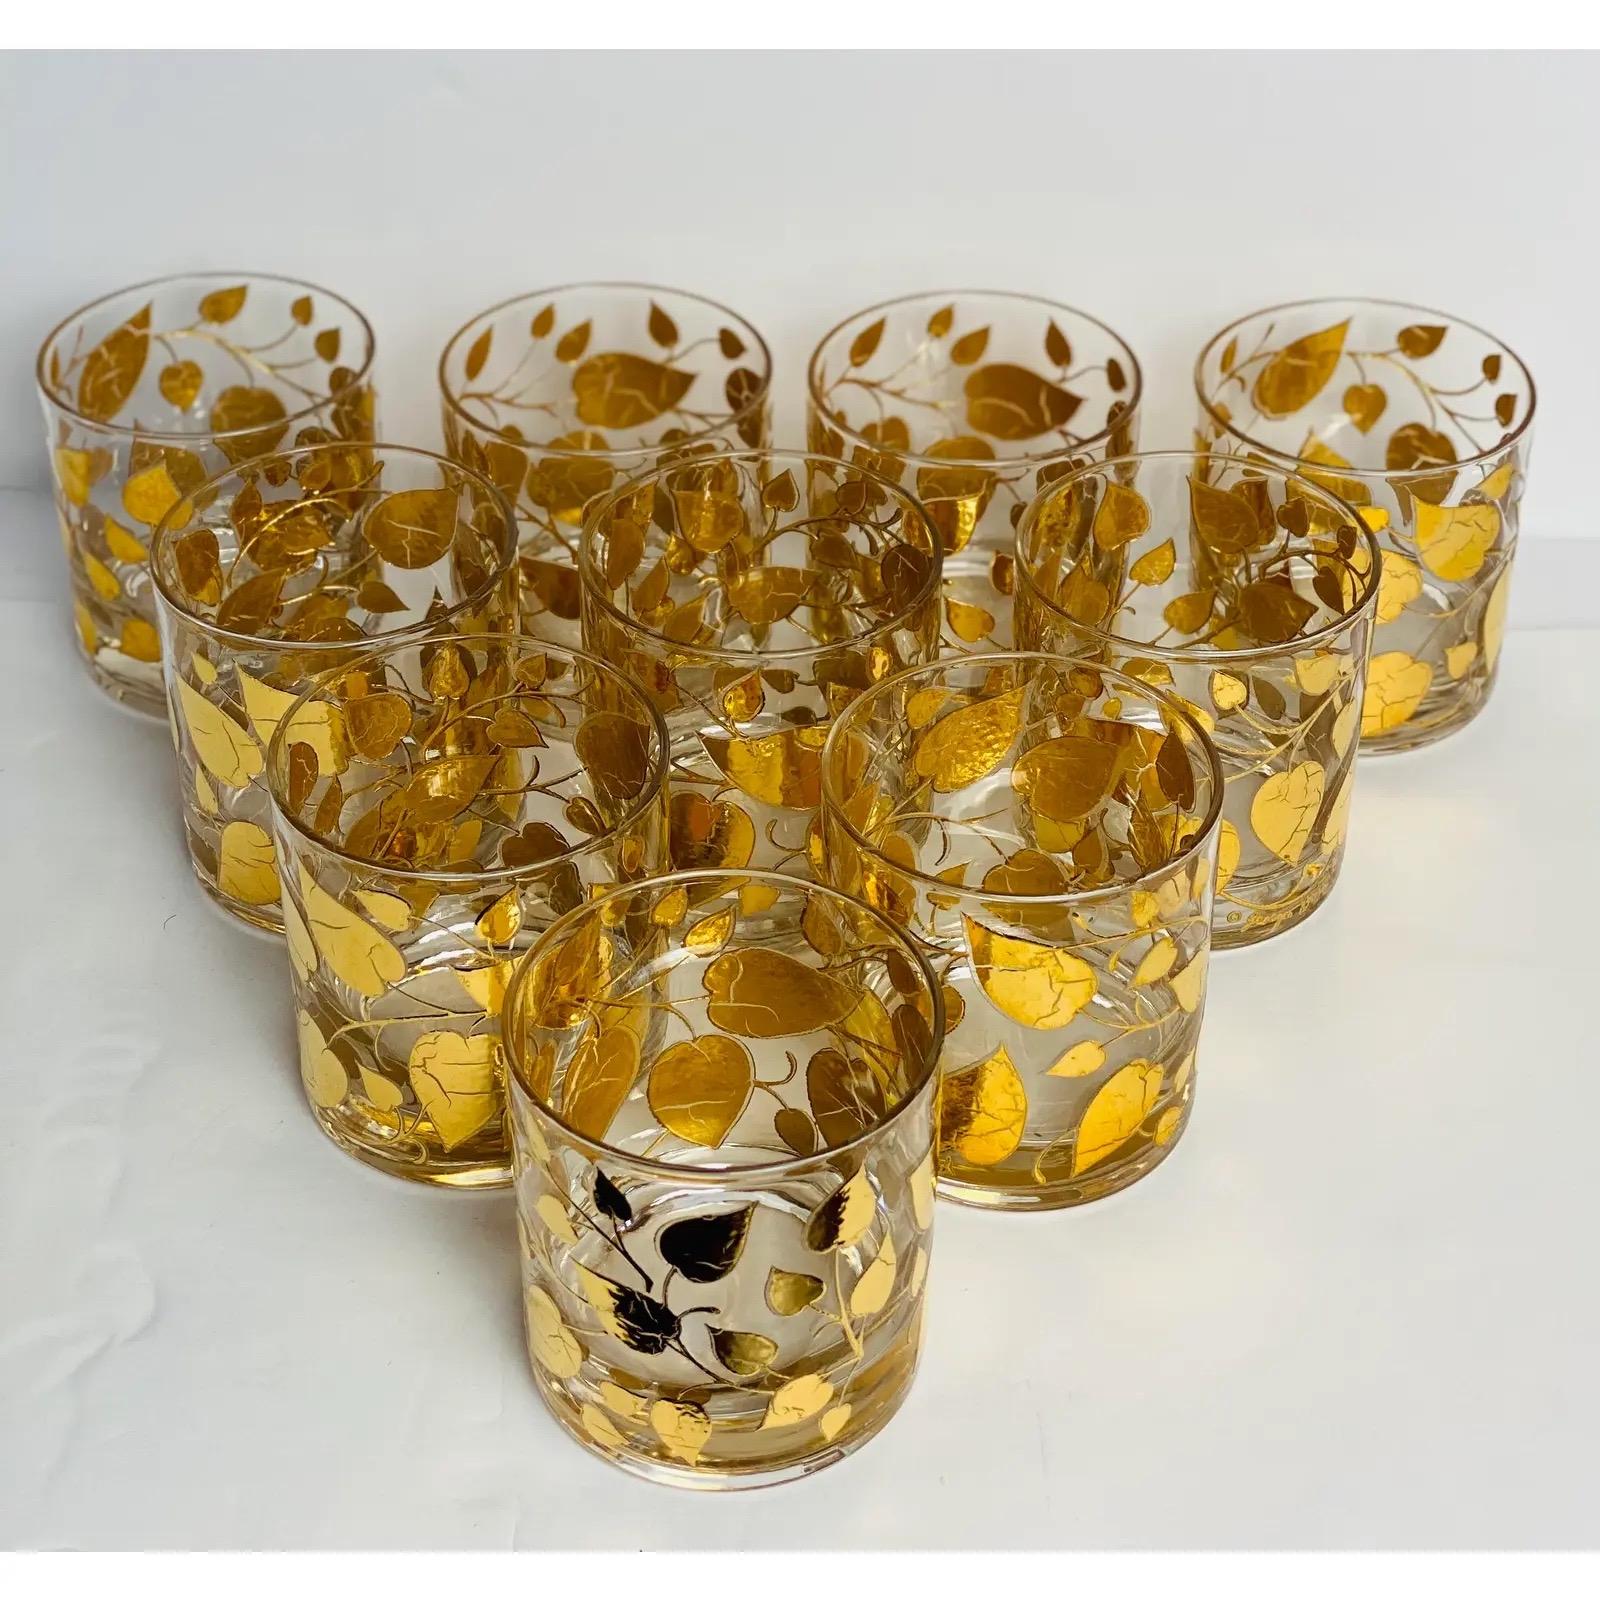 We are very pleased to offer a stunning set of ten Mid-century old fashioned tumbler glasses by American designer Gorges Briard, circa the 1970s. This stylish set features 22-karat gold leaf details. In like-new condition. All pieces are marked.